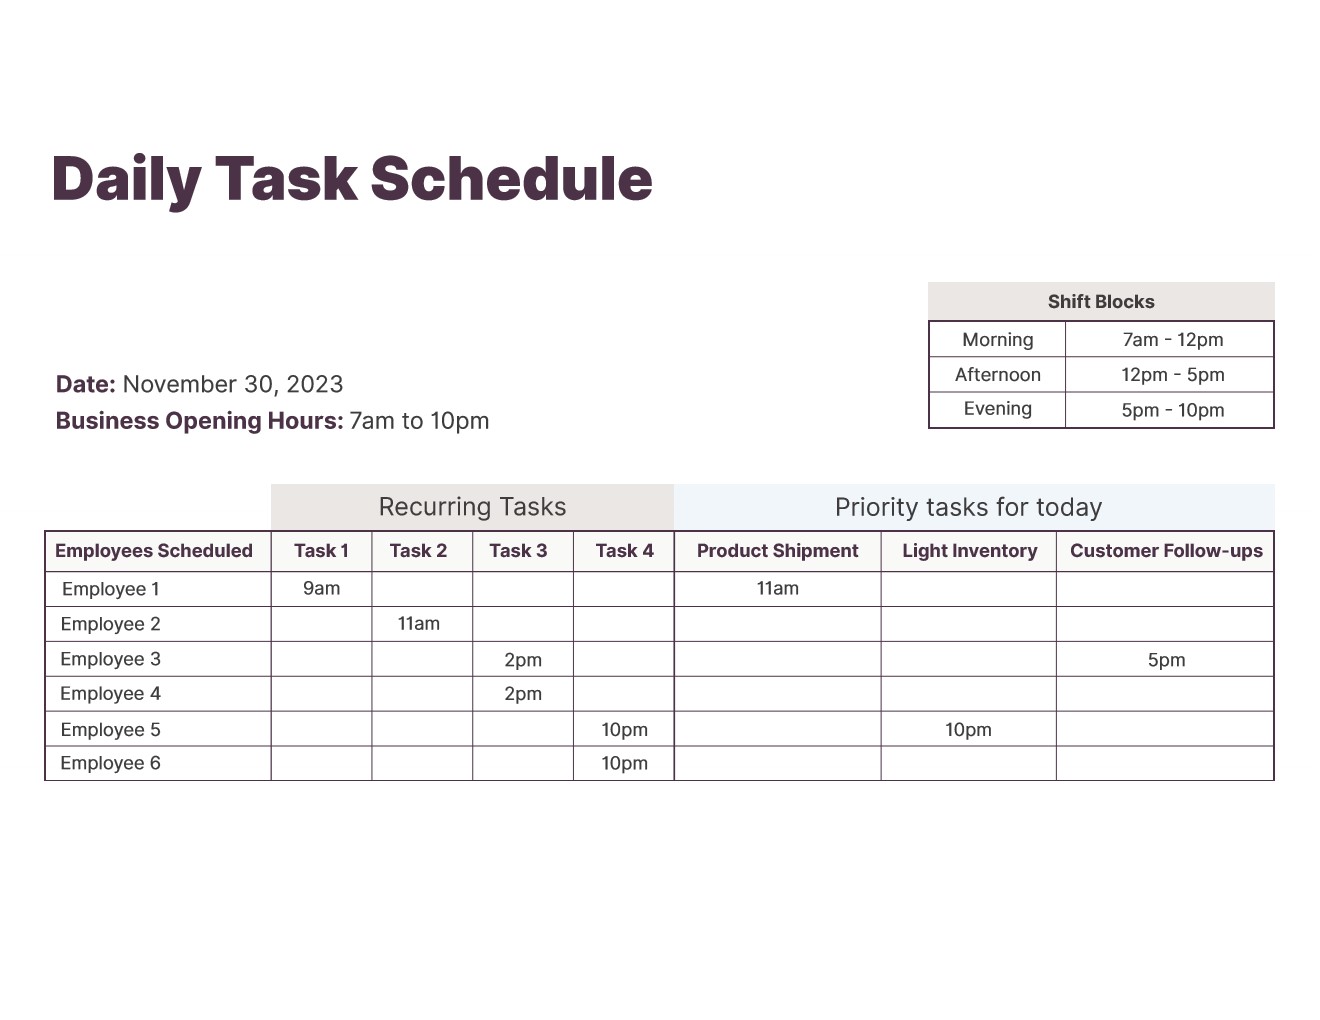 Daily task schedule